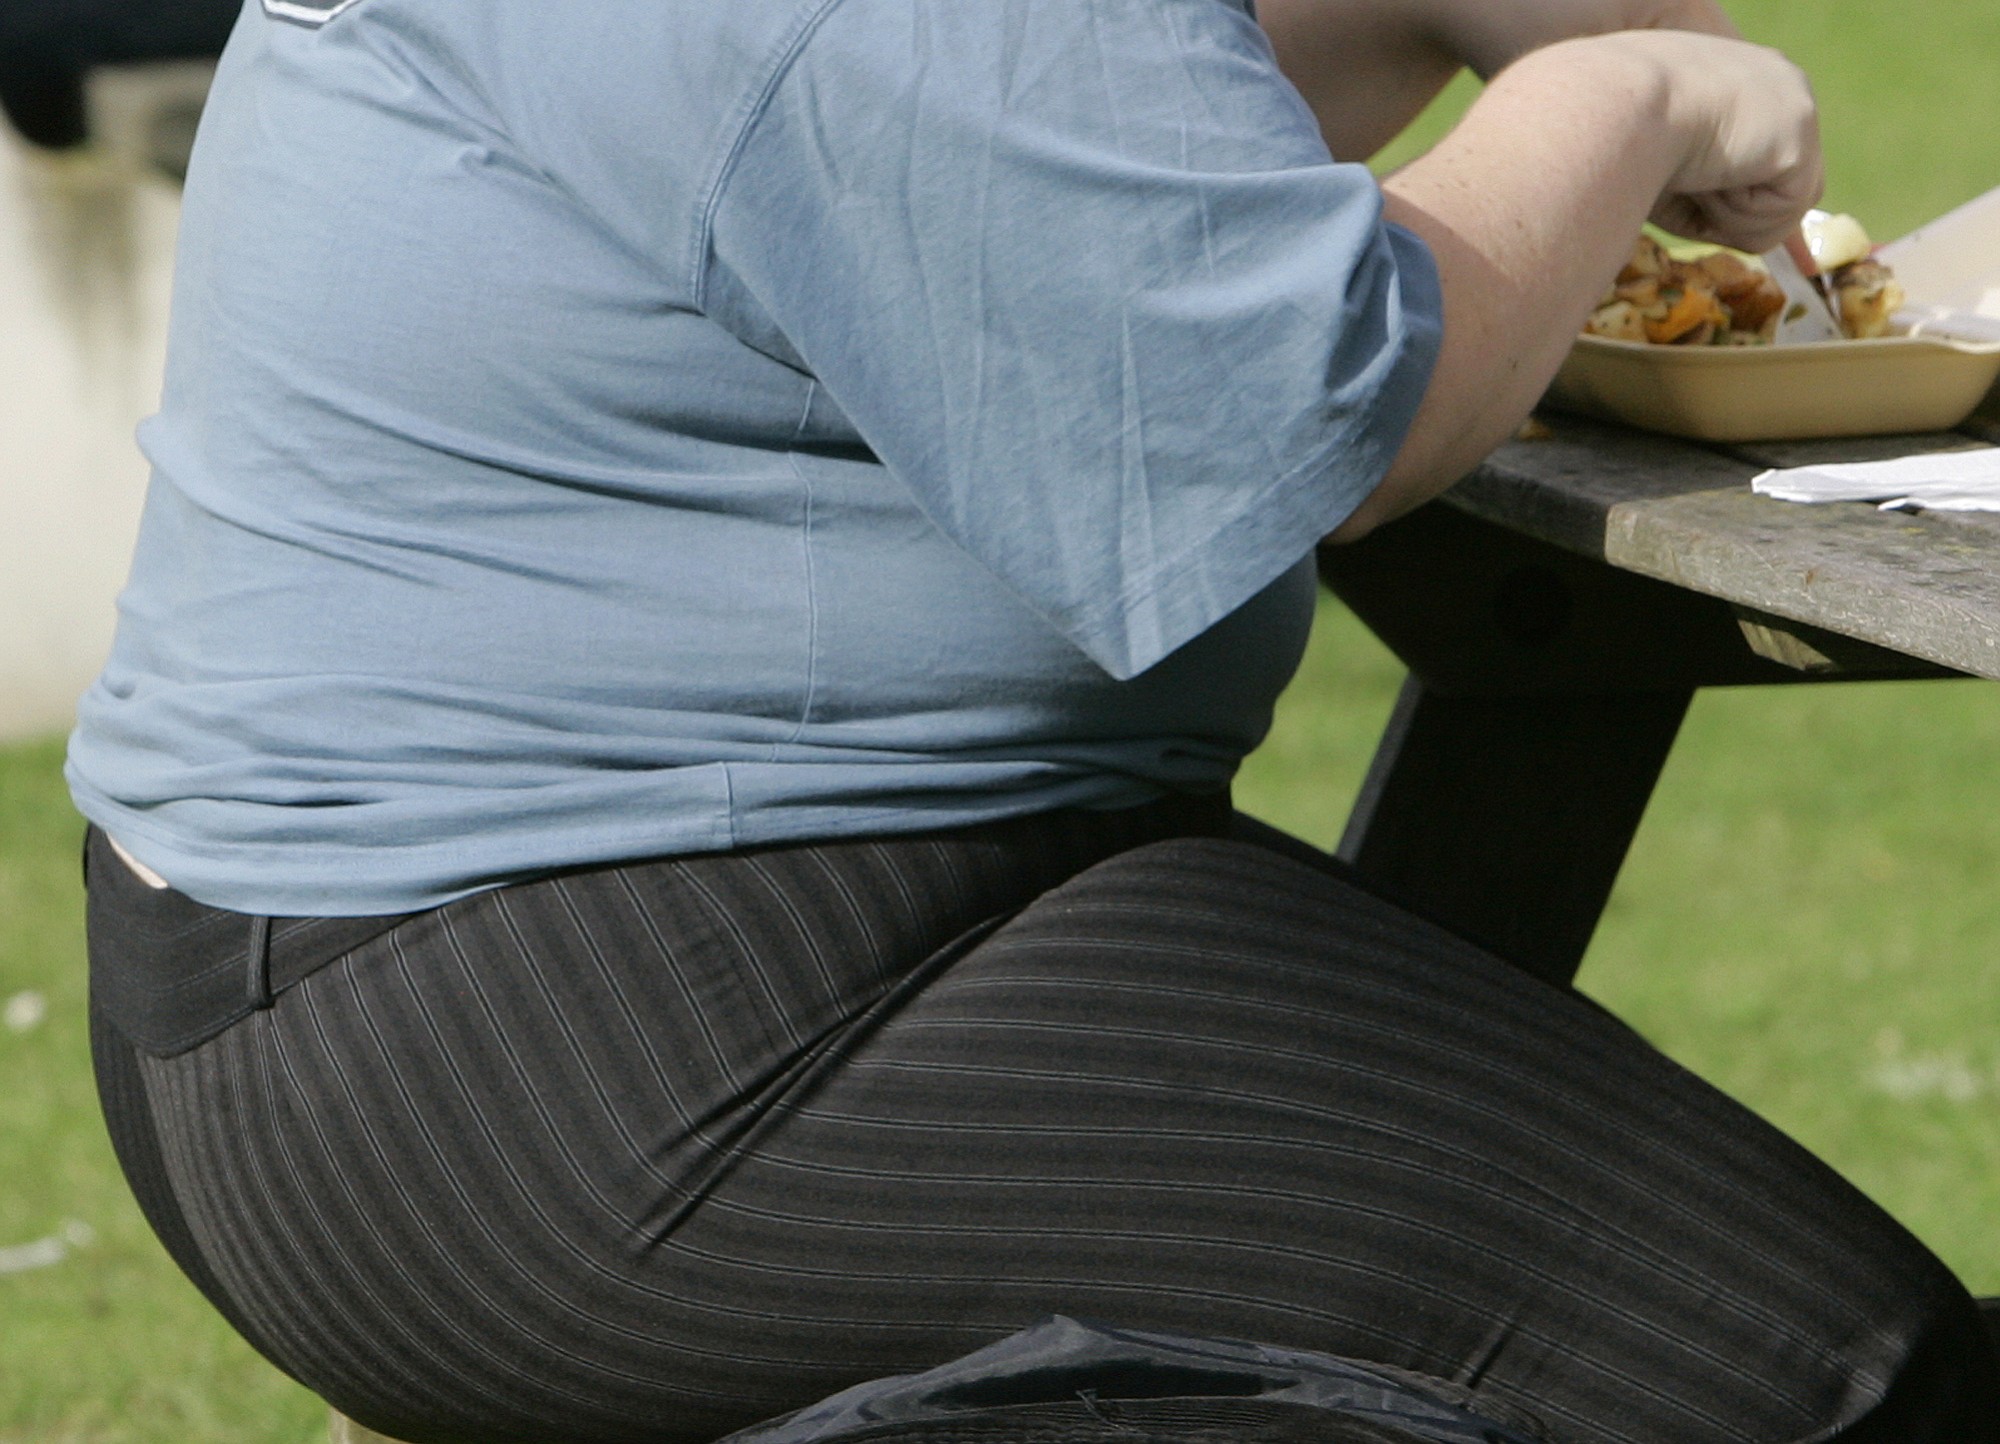 An overweight person eats in London. A new report by the McKinsey Global Institute released Thursday says that the global cost of obesity has risen to $2 trillion annually -- nearly as much as smoking or the combined impact of armed violence, war and terrorism. The report released Thursday focused on the economics of obesity, putting it among the top three social programs generated by human beings. It puts its impact at 2.8 percent of global gross domestic product.